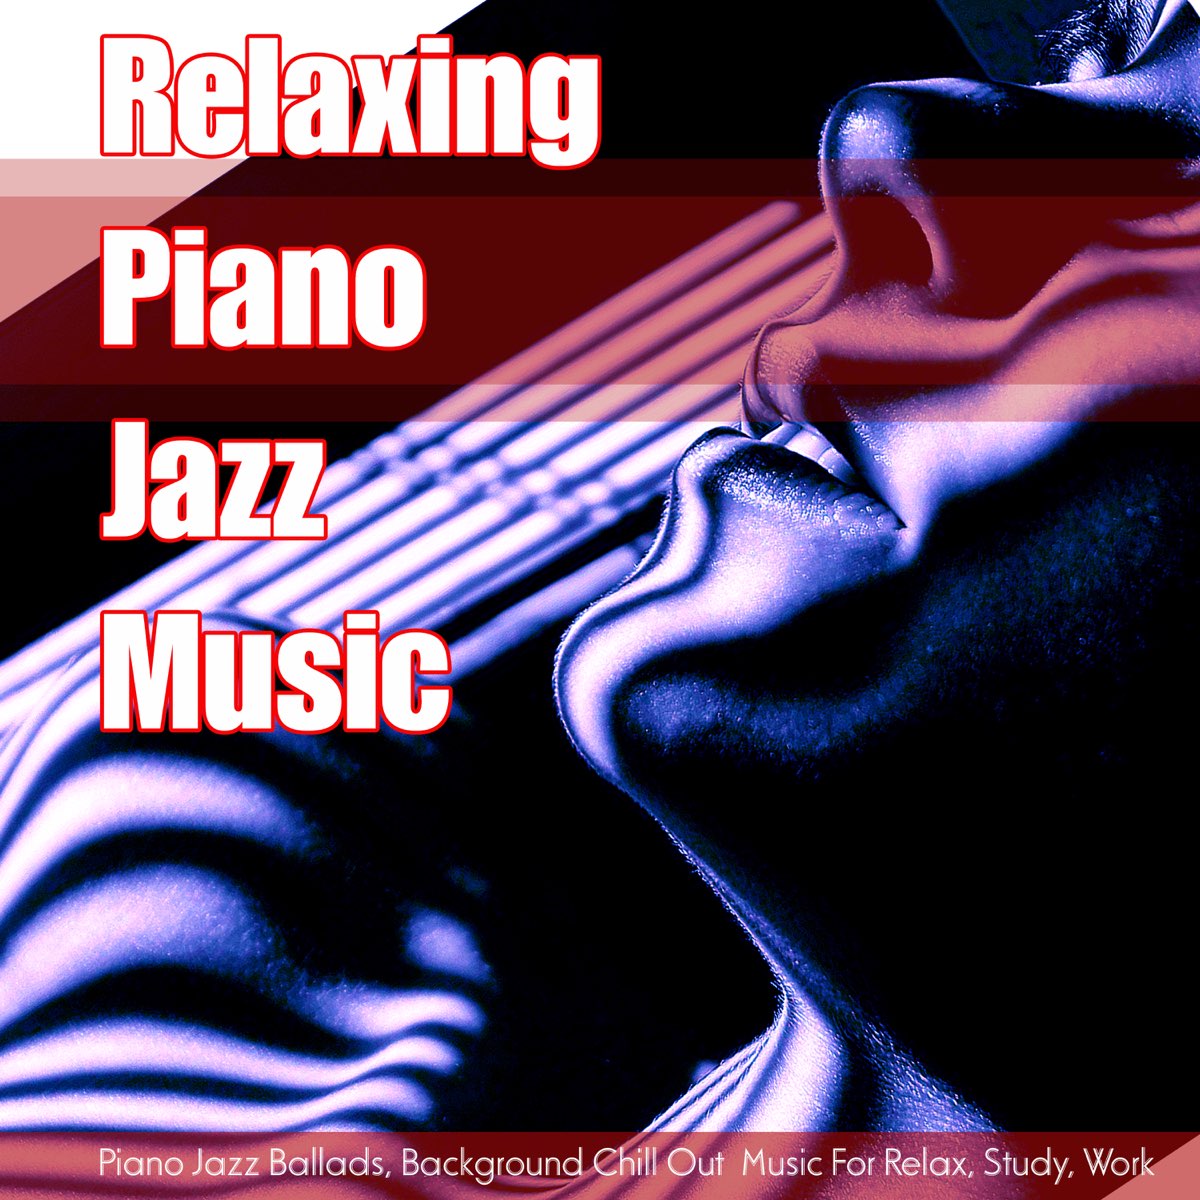 Relaxing Piano Jazz Music: Piano Jazz Ballads, Background Chill Out Music  for Relax, Study, Work de Roberto Boccasavia, Jazz Music DEA Channel & Jazz  Music Academy en Apple Music